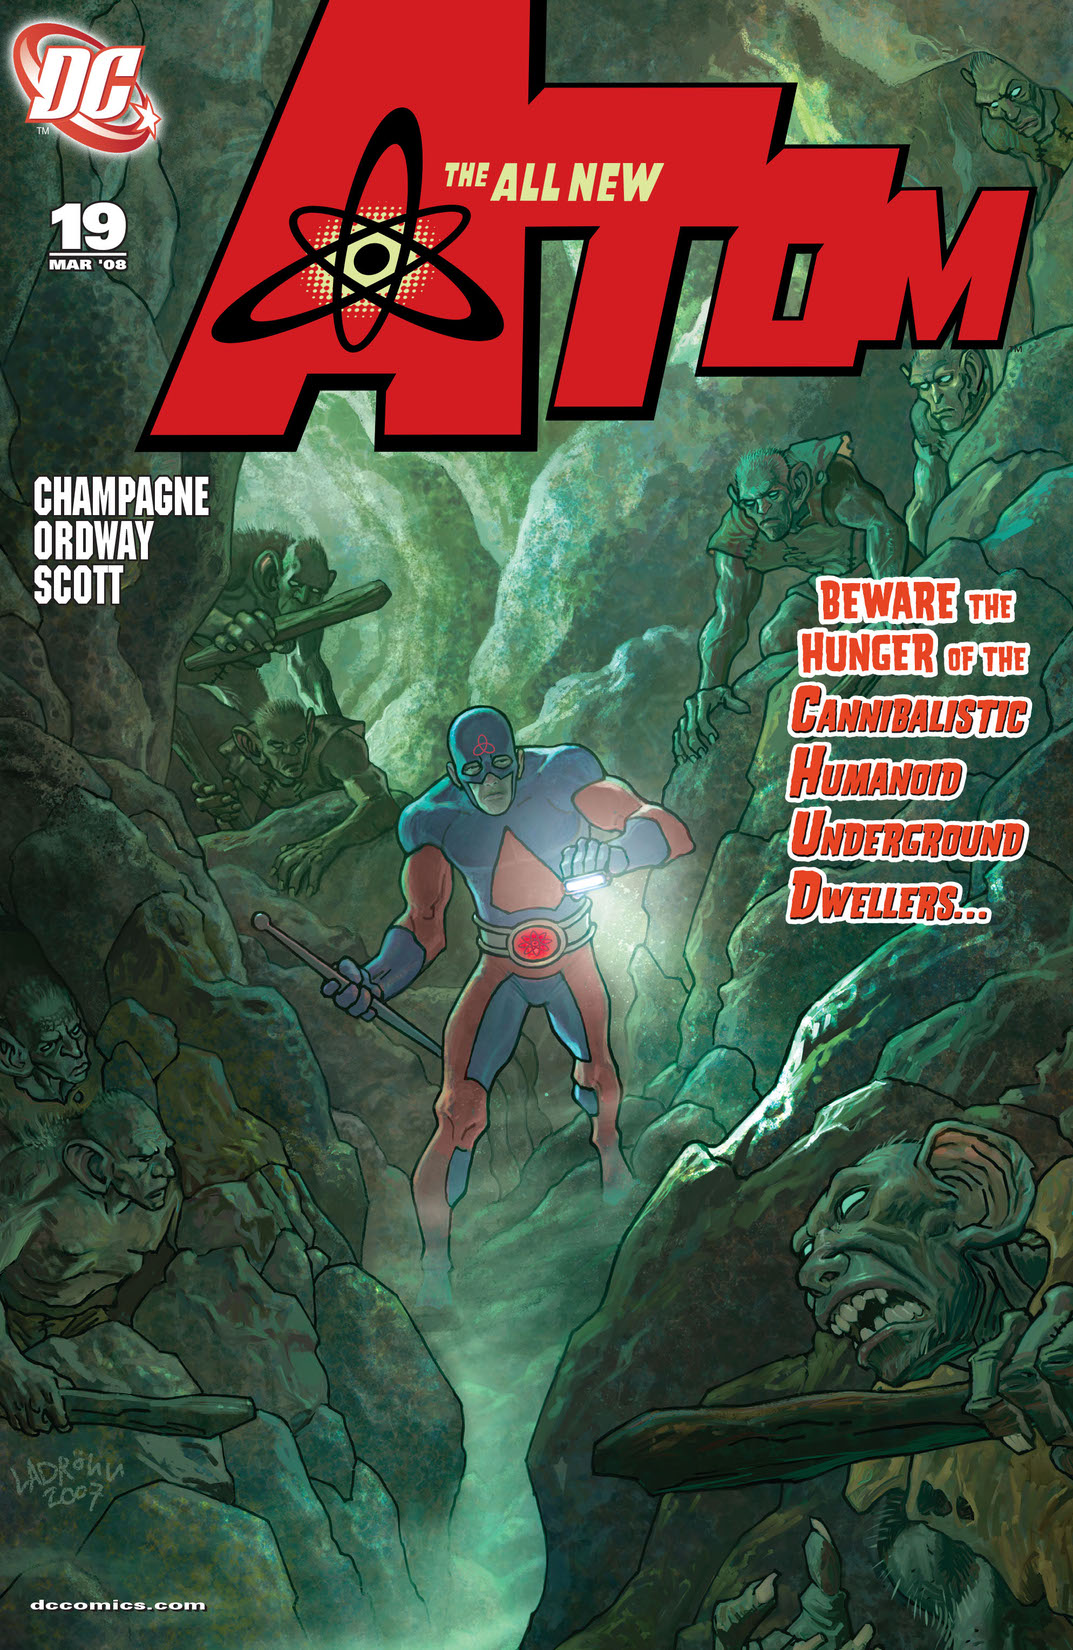 The All New Atom #19 preview images